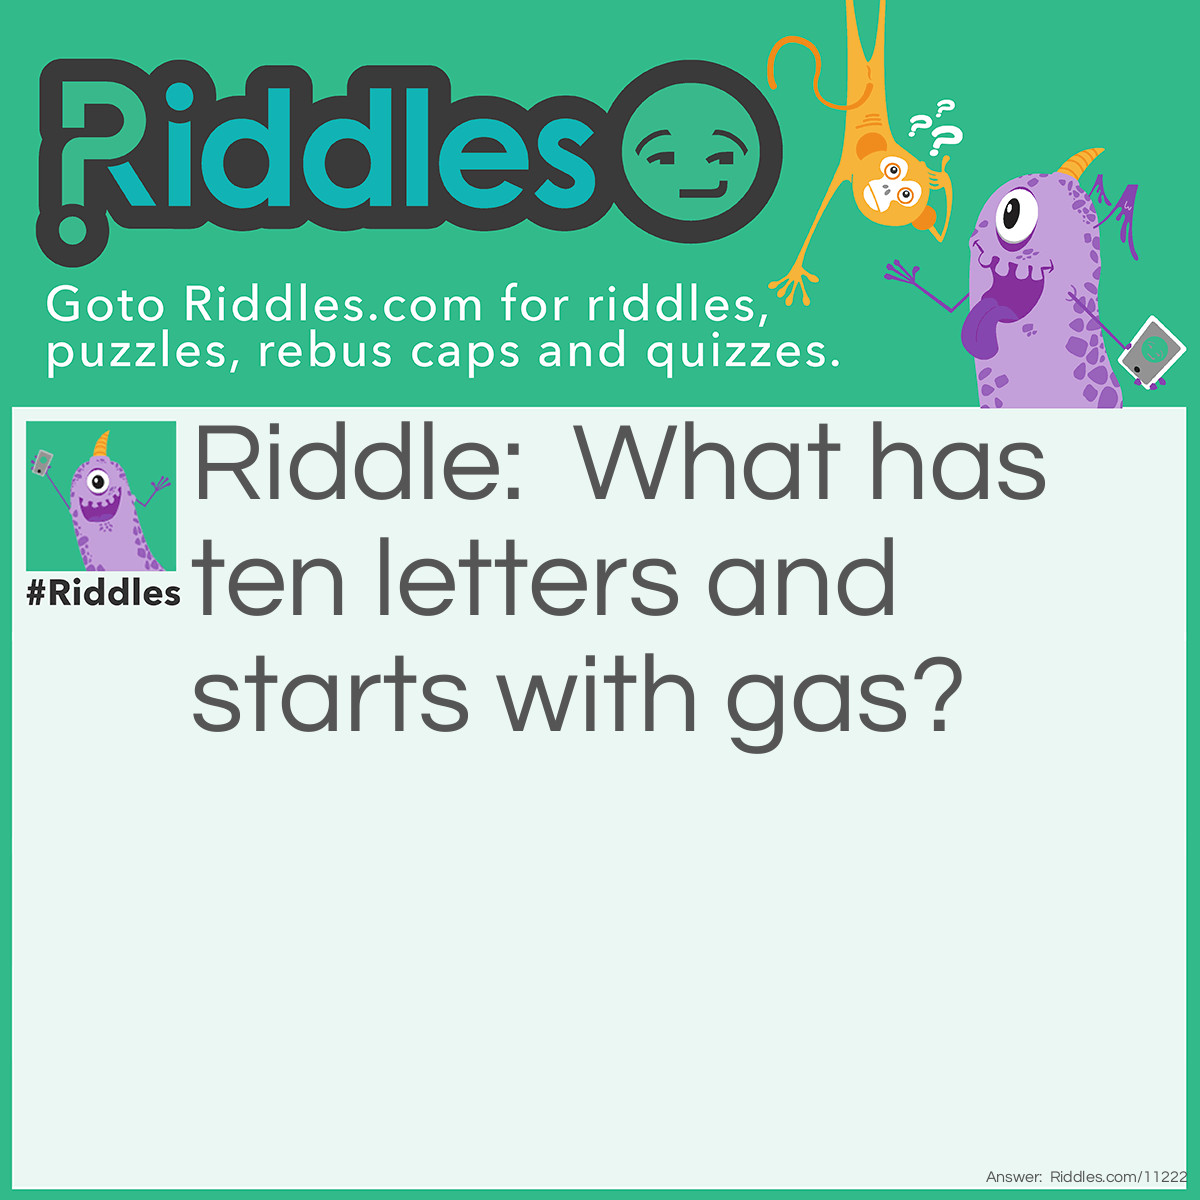 Riddle: What has ten letters and starts with gas? Answer: An automobile